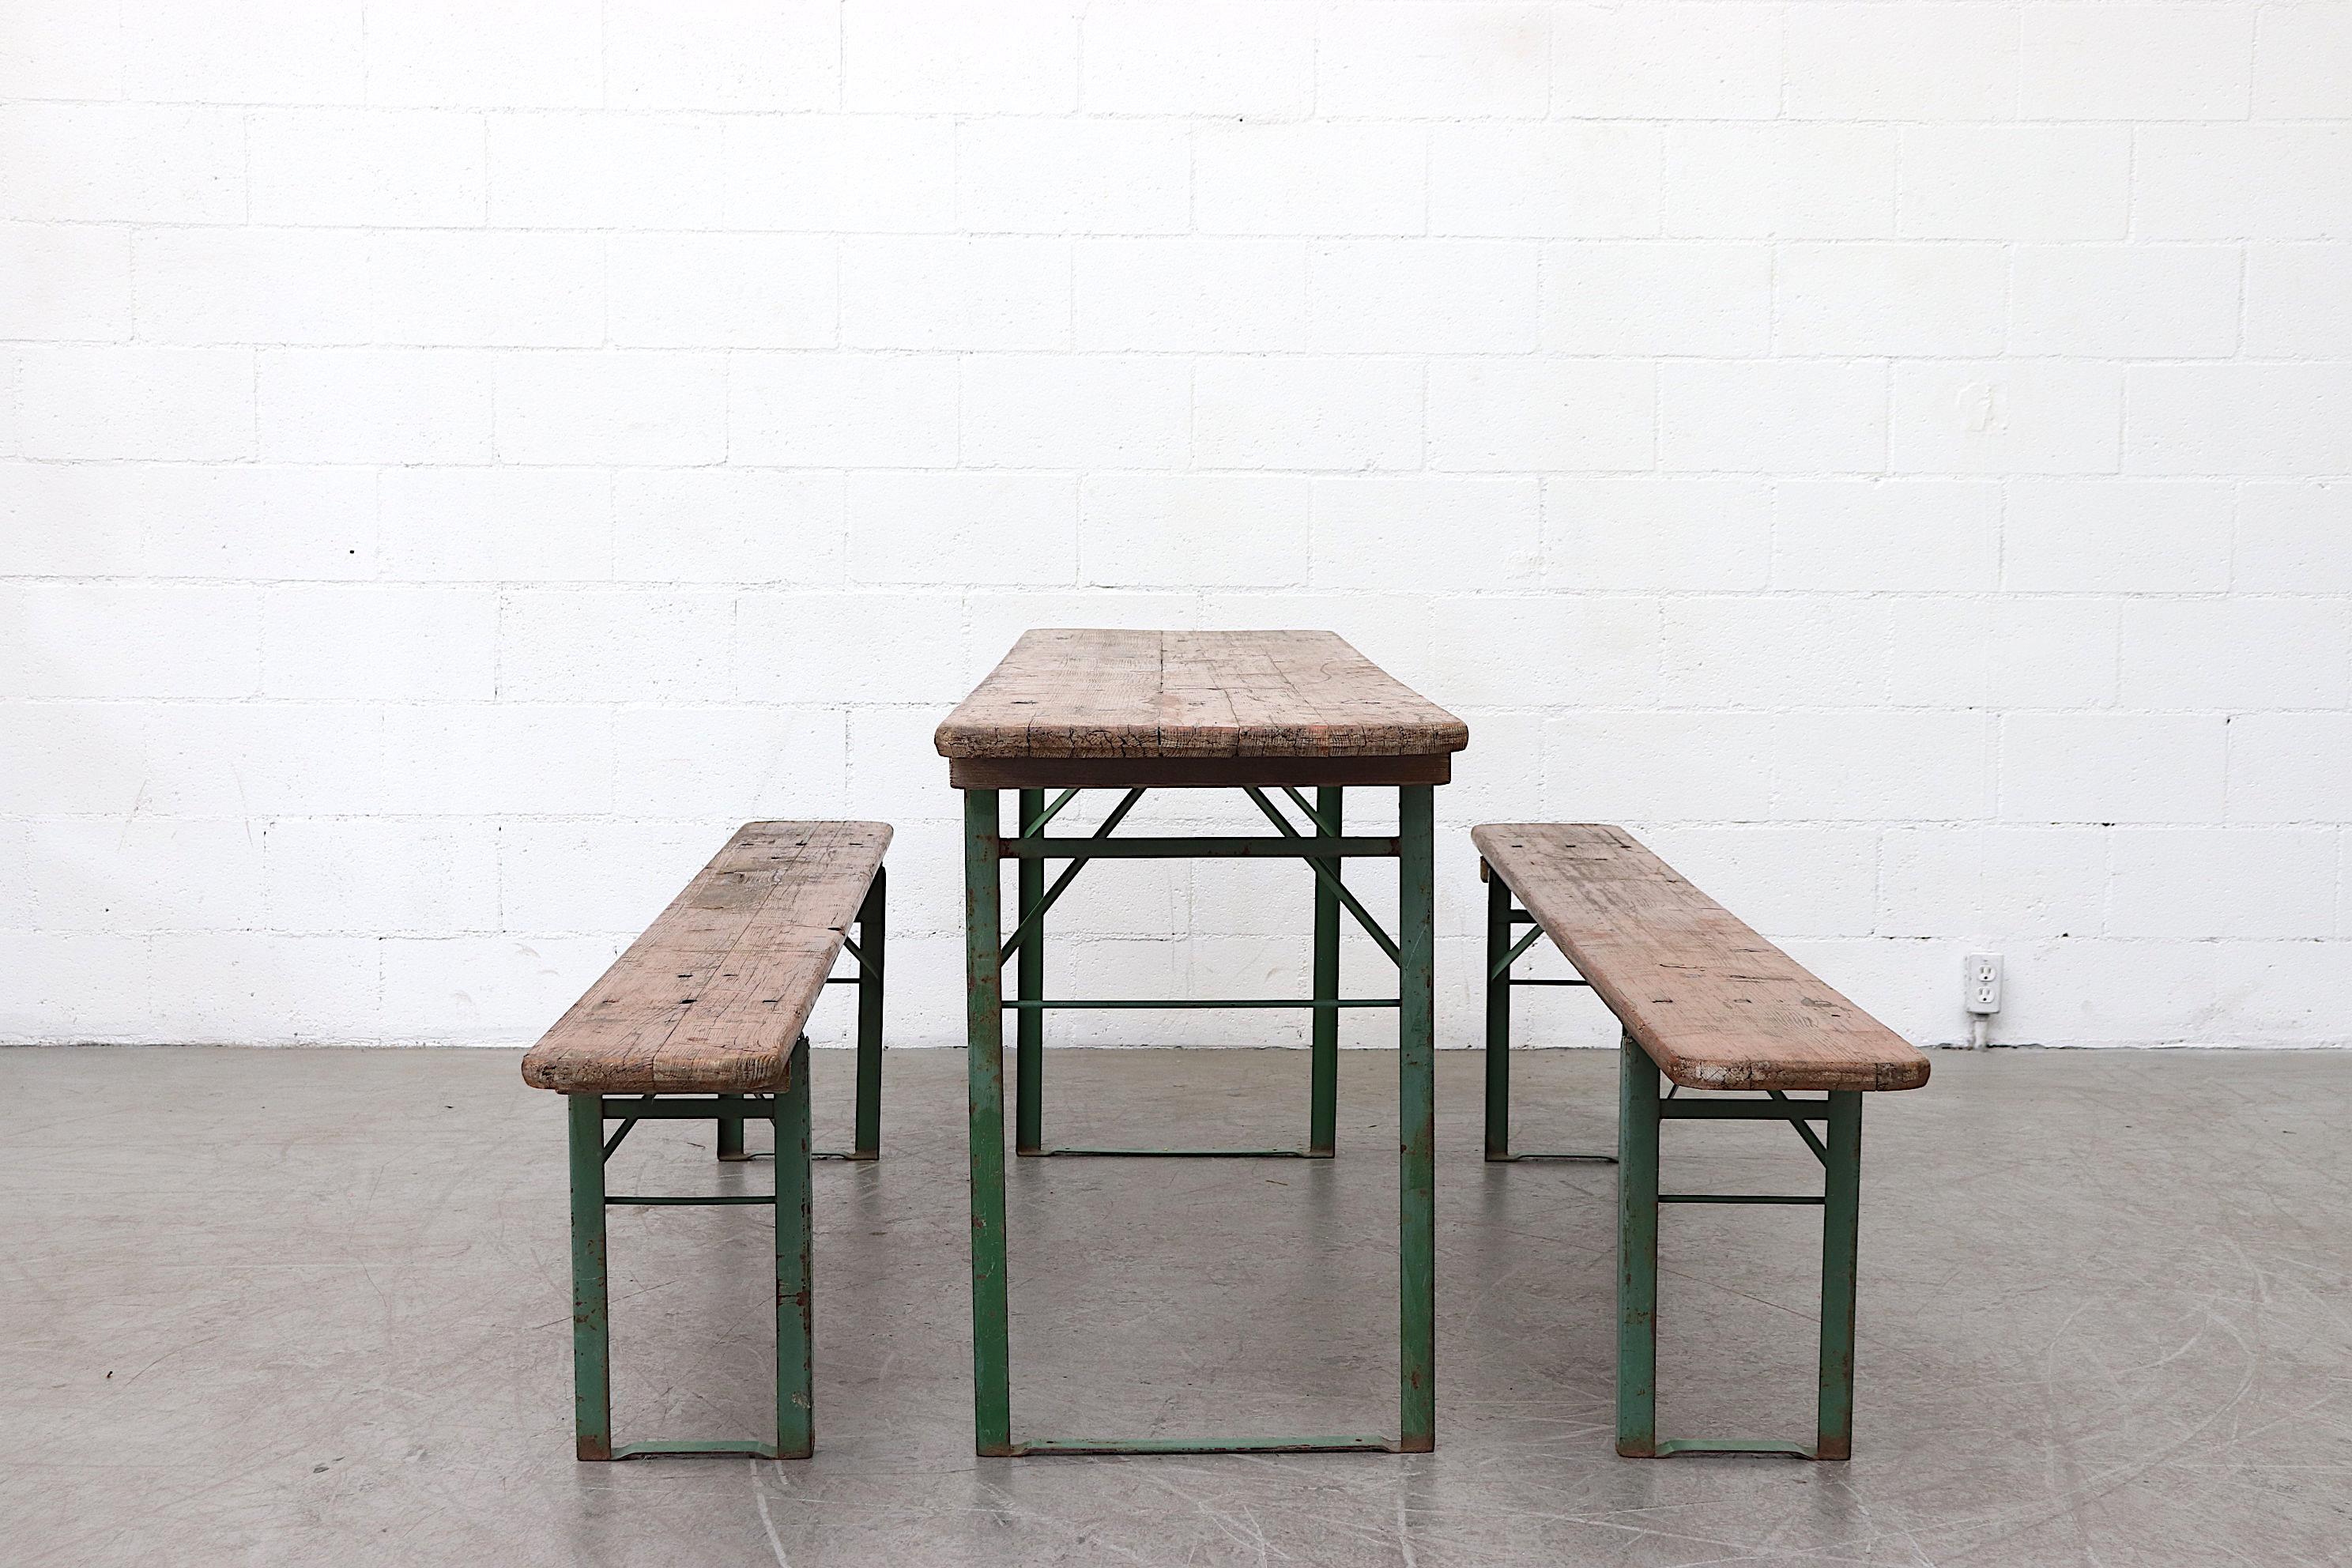 Wood topped folding tables and benches, sold as a set of 2 benches and 1 table. Metal is in original condition with visible patina. Wood in original used condition as well. Sets vary in color and wear. Benches measure 86.5 x 10.5 x 18.5. Set price.